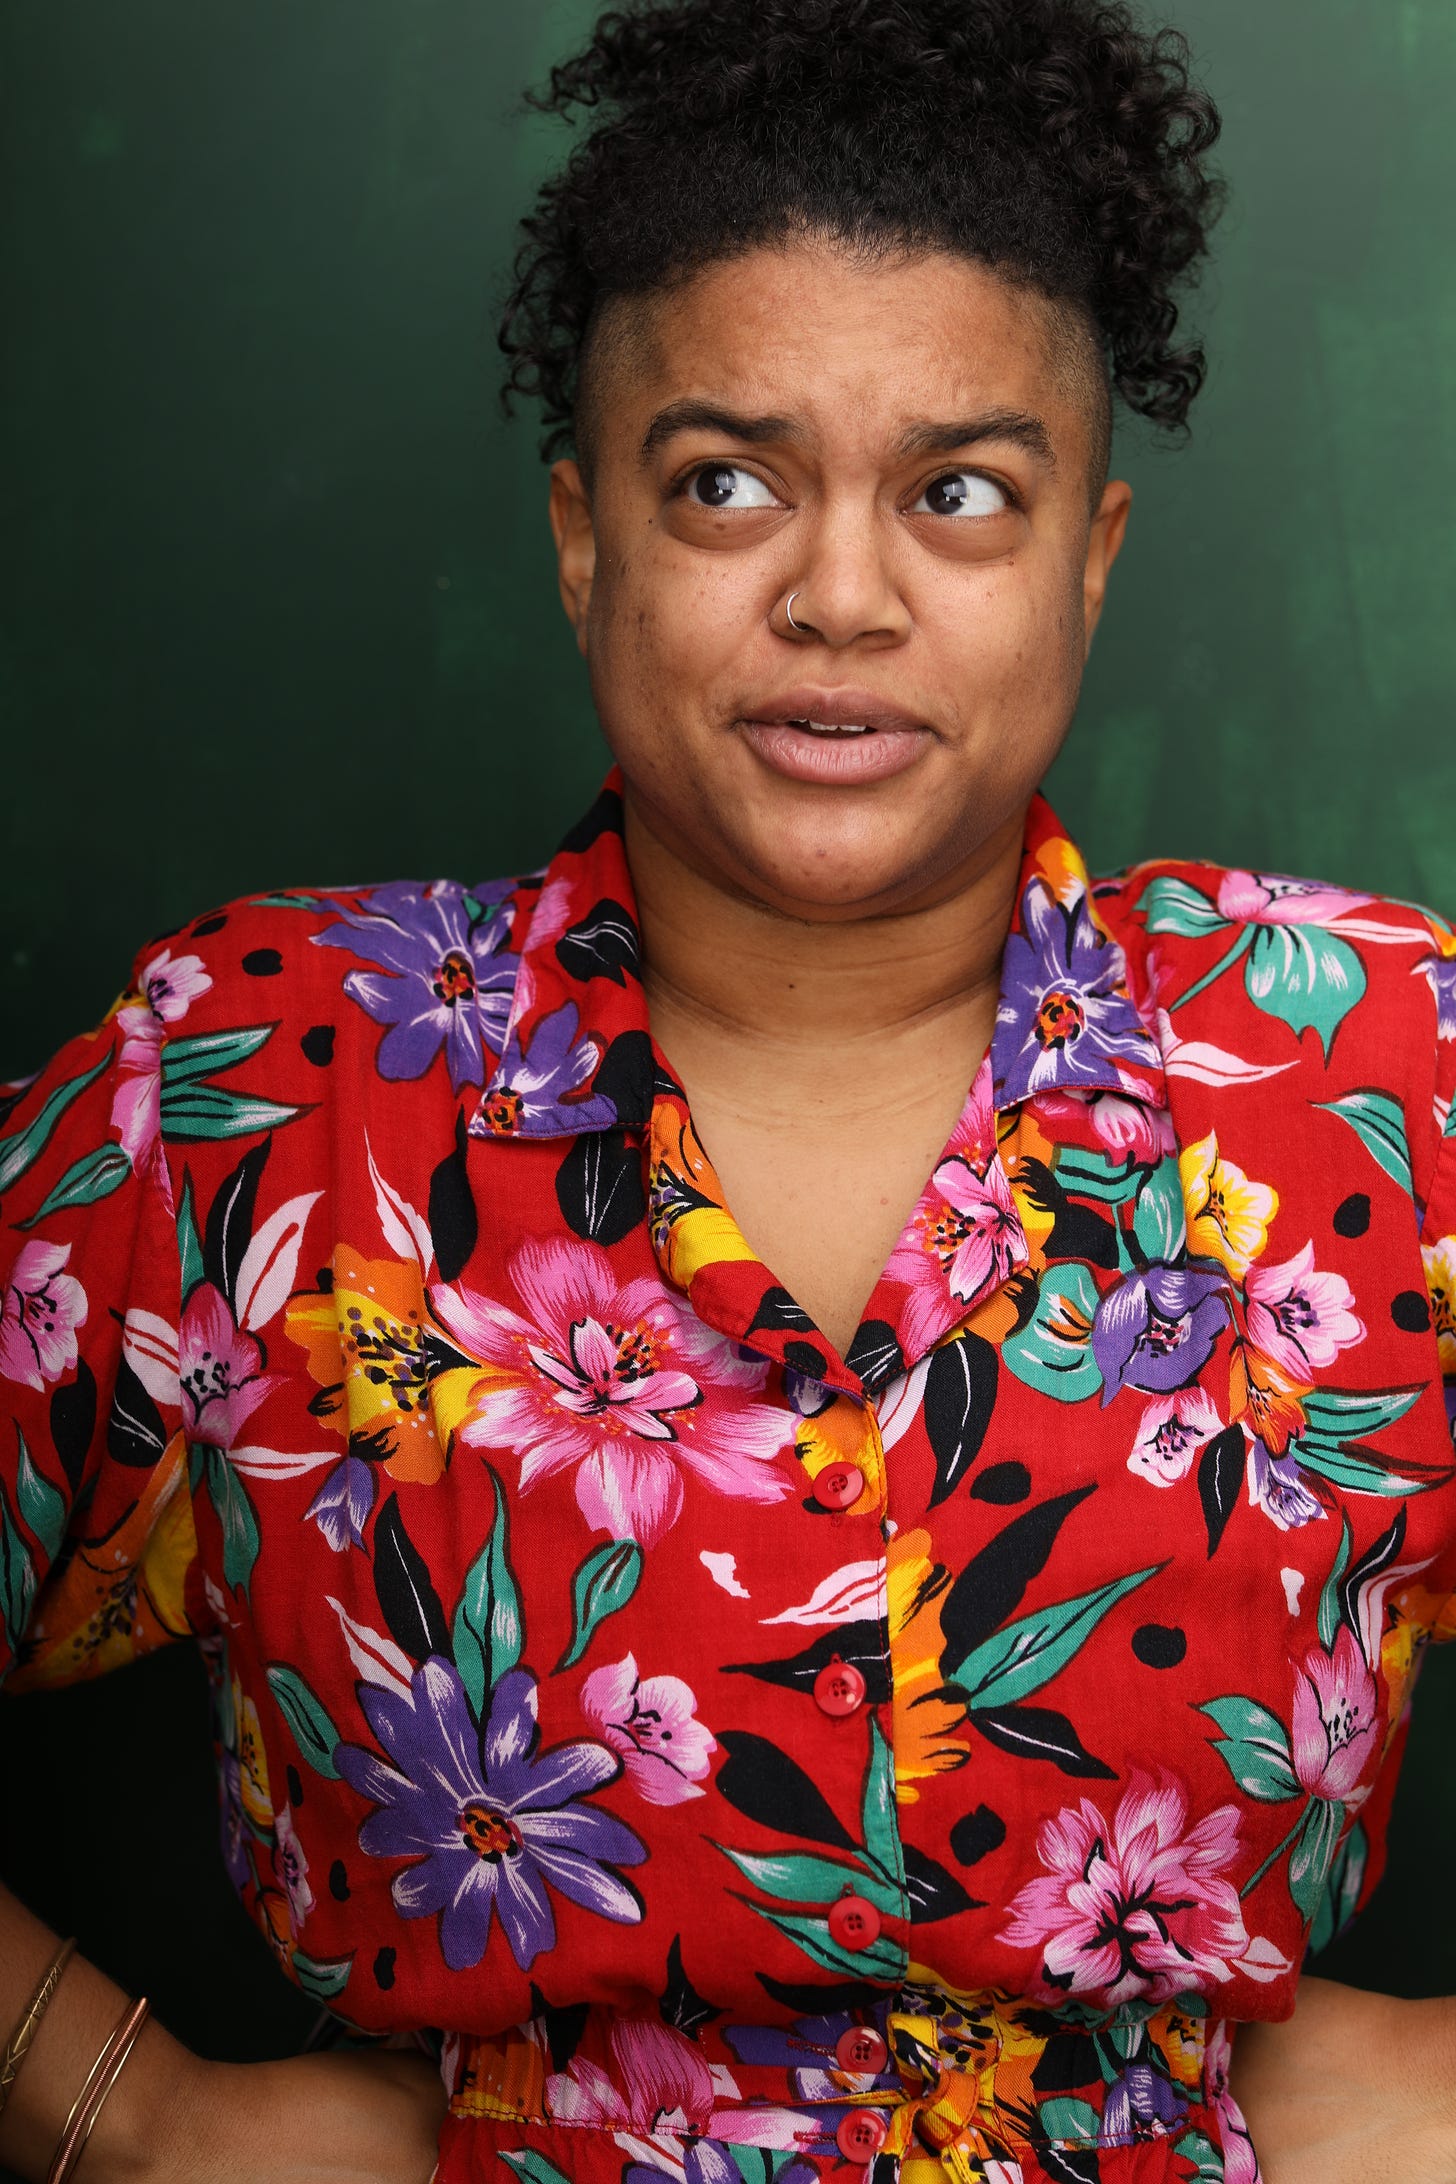 A photo of a light-skinned Black person with a silver nose ring looking to the left and making a silly face. They are wearing a colorful red floral top with buttons against a dark green background.